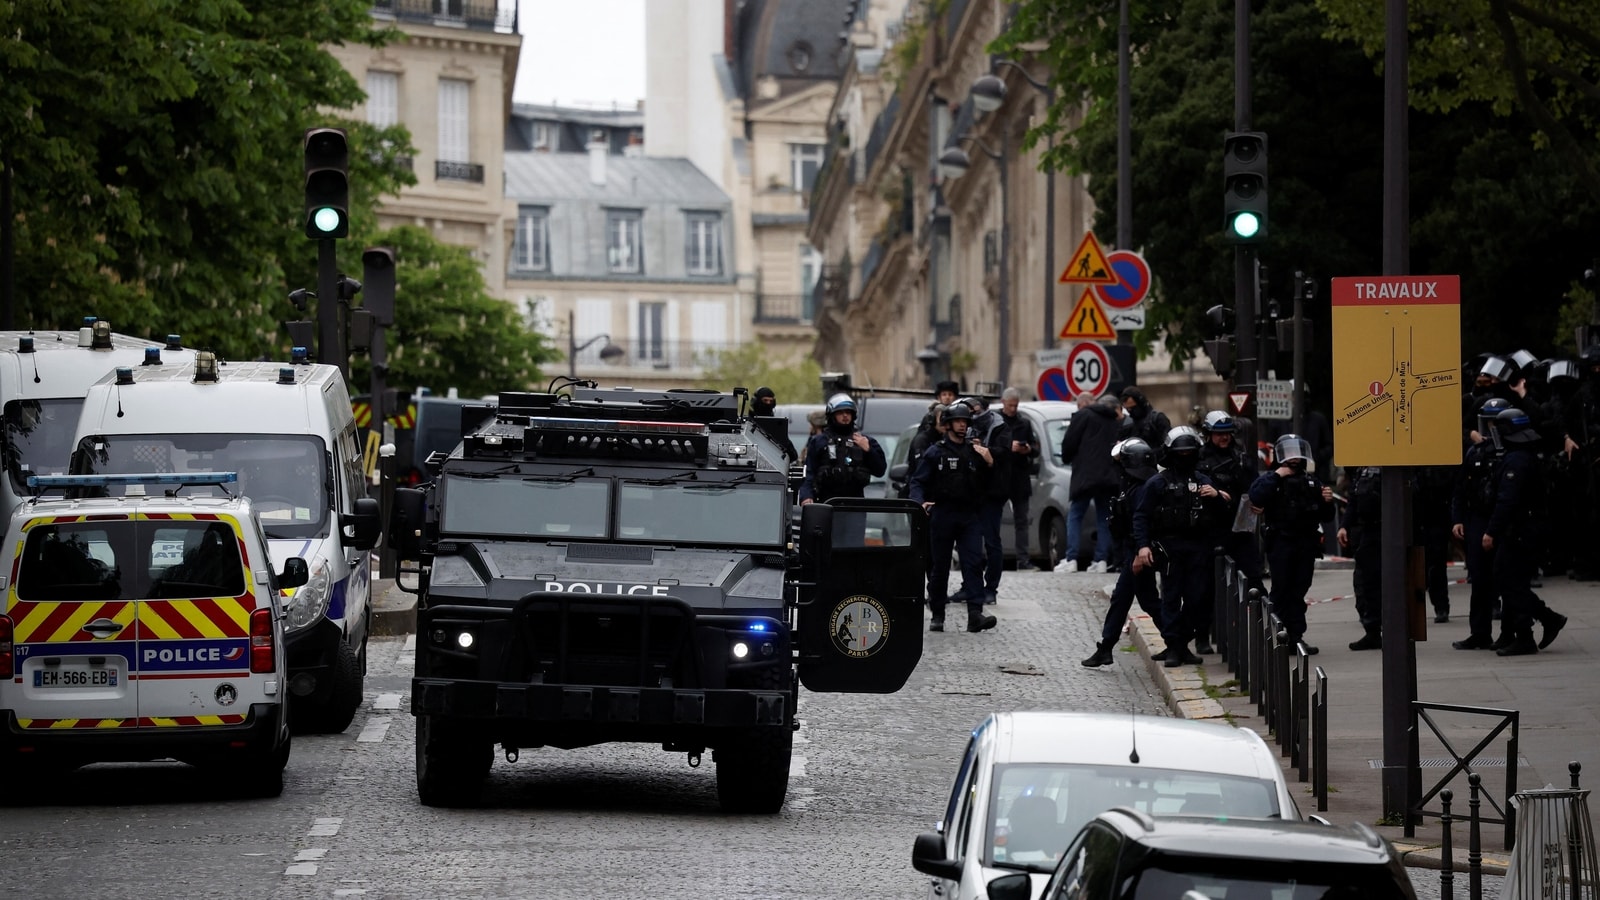 Man enters Iranian consulate in Paris with grenades, explosives vest; arrested